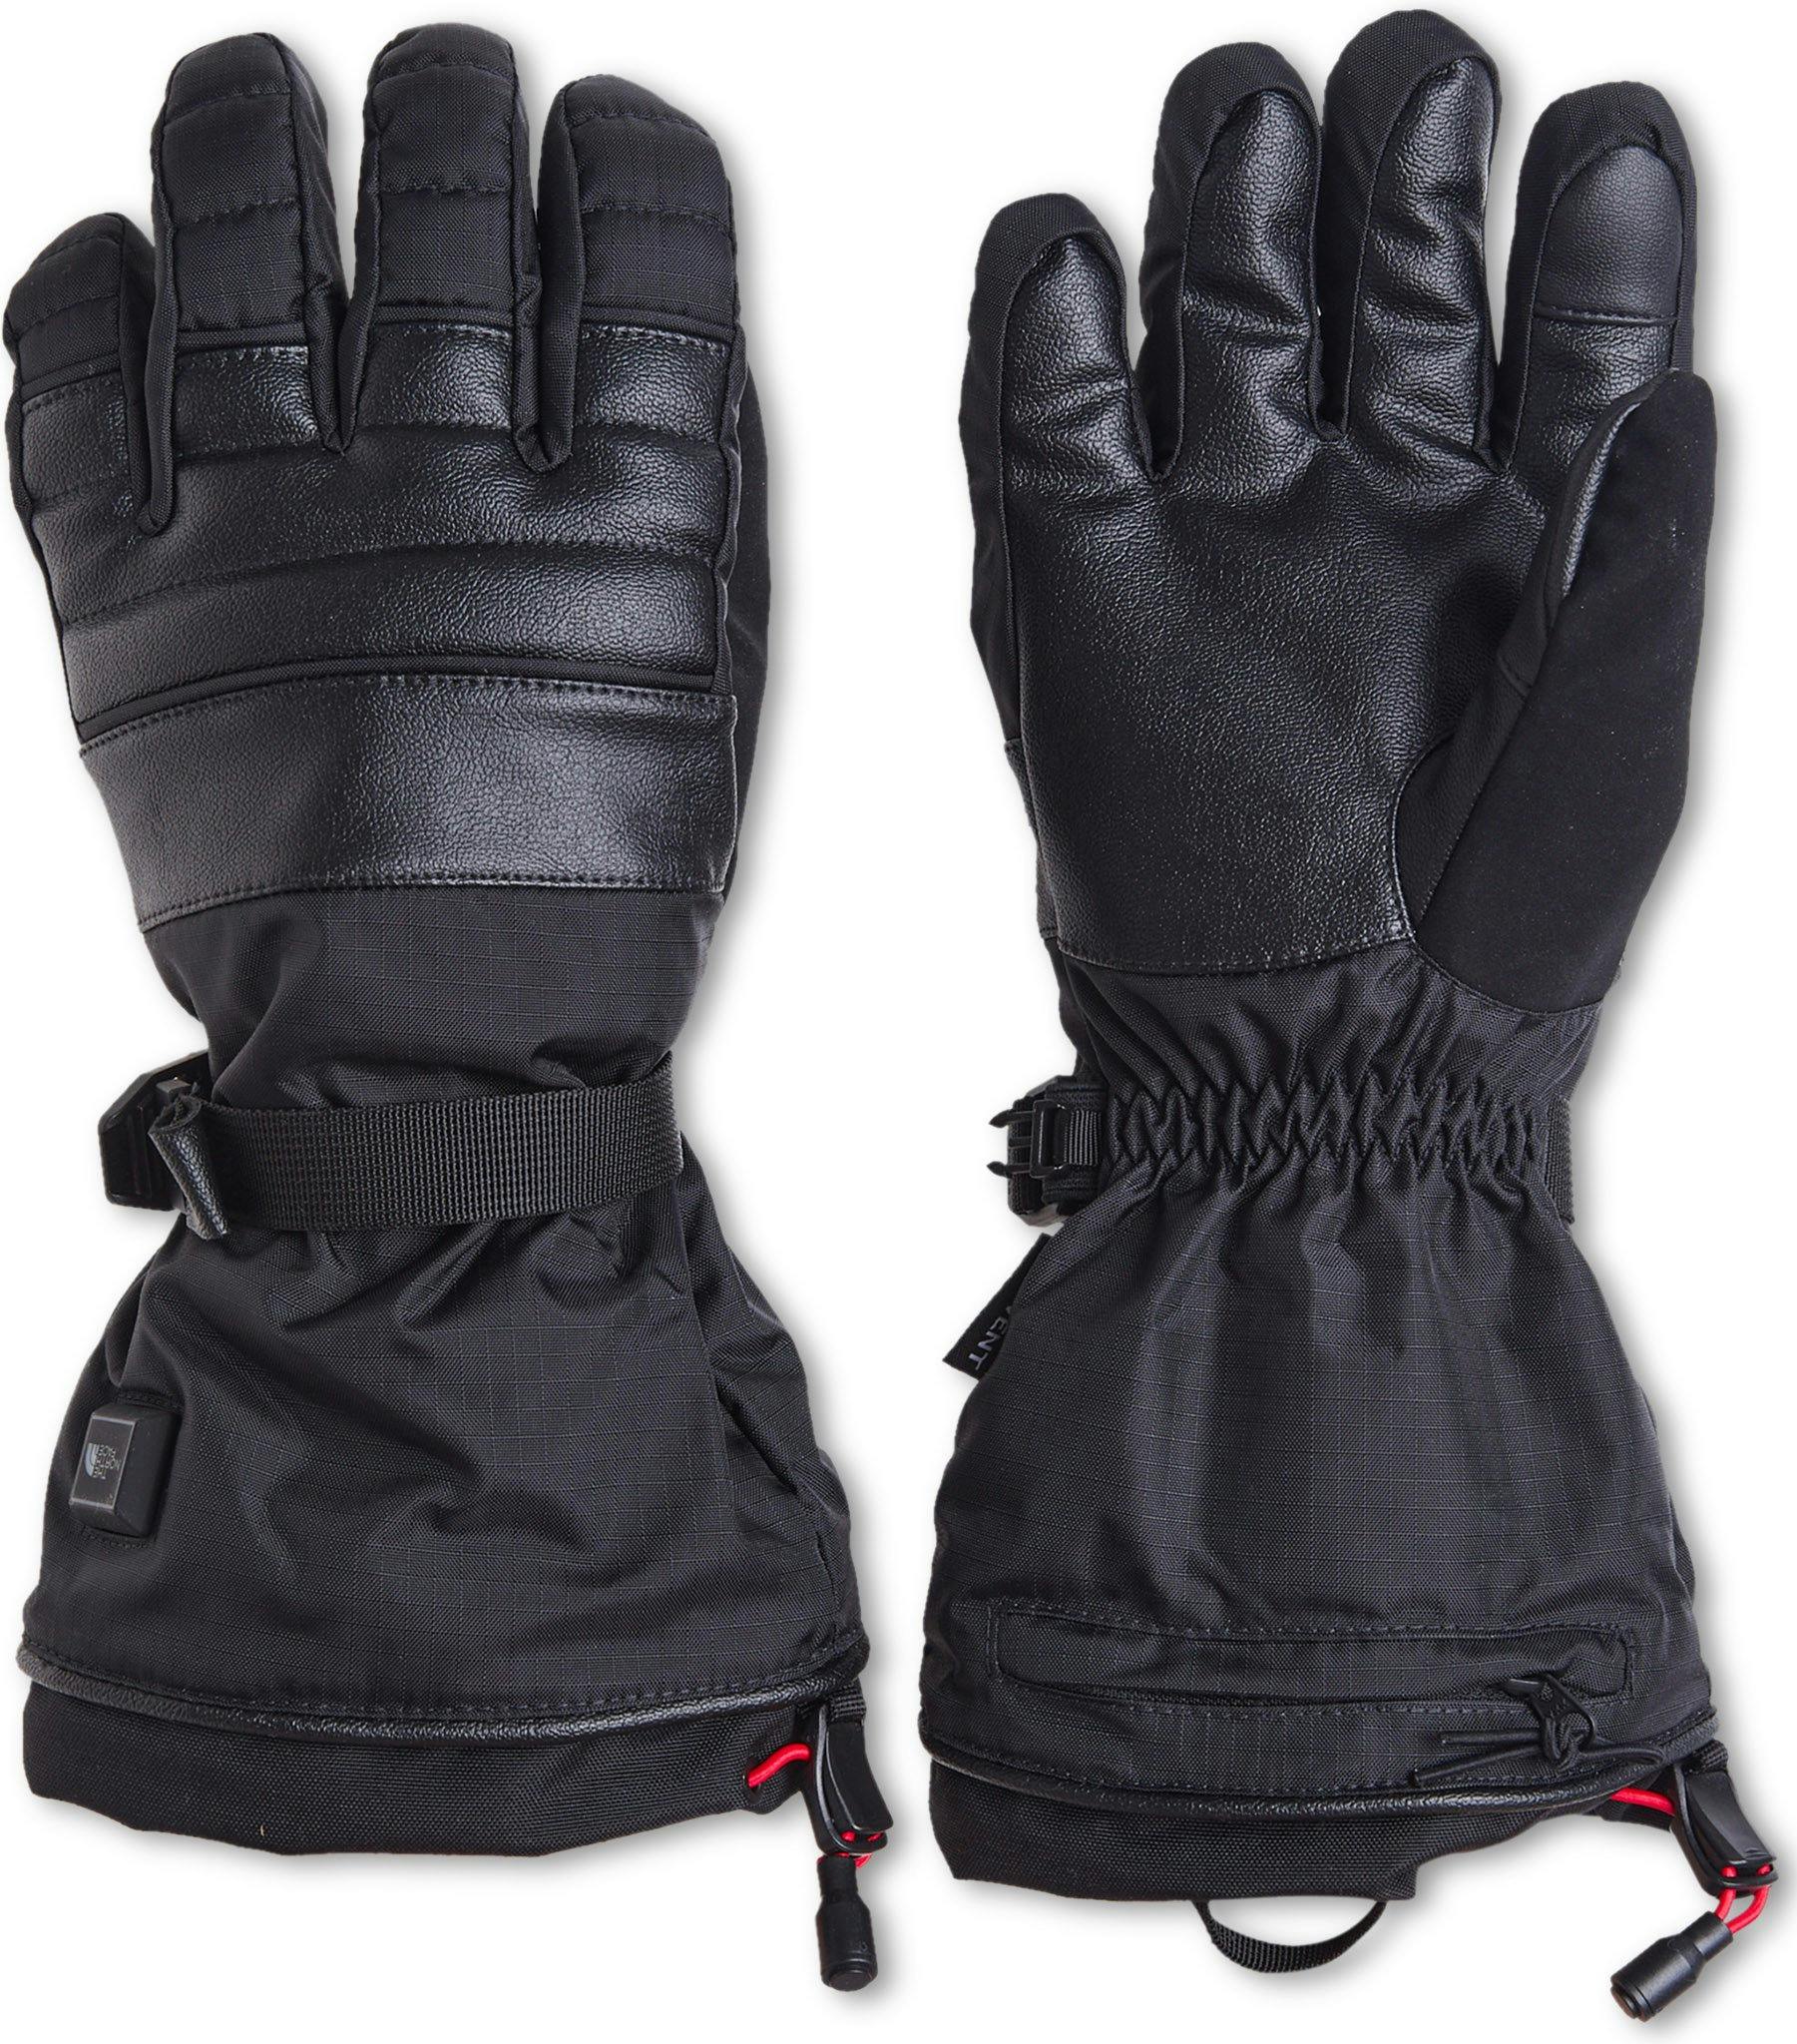 Product image for Montana Inferno Heated Glove - Women’s